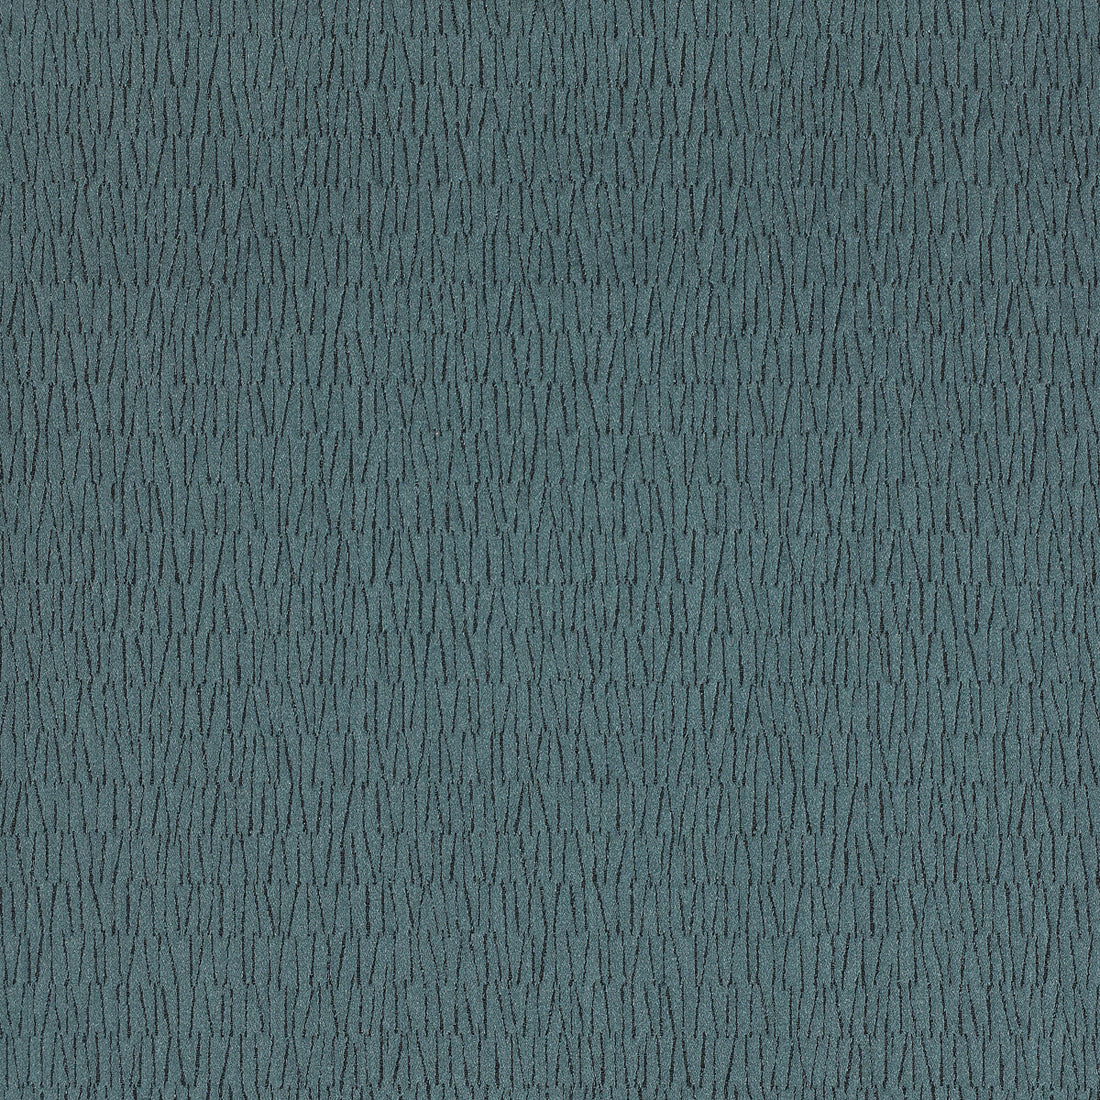 Earth fabric in 4 color - pattern LZ-30217.04.0 - by Kravet Design in the Lizzo collection